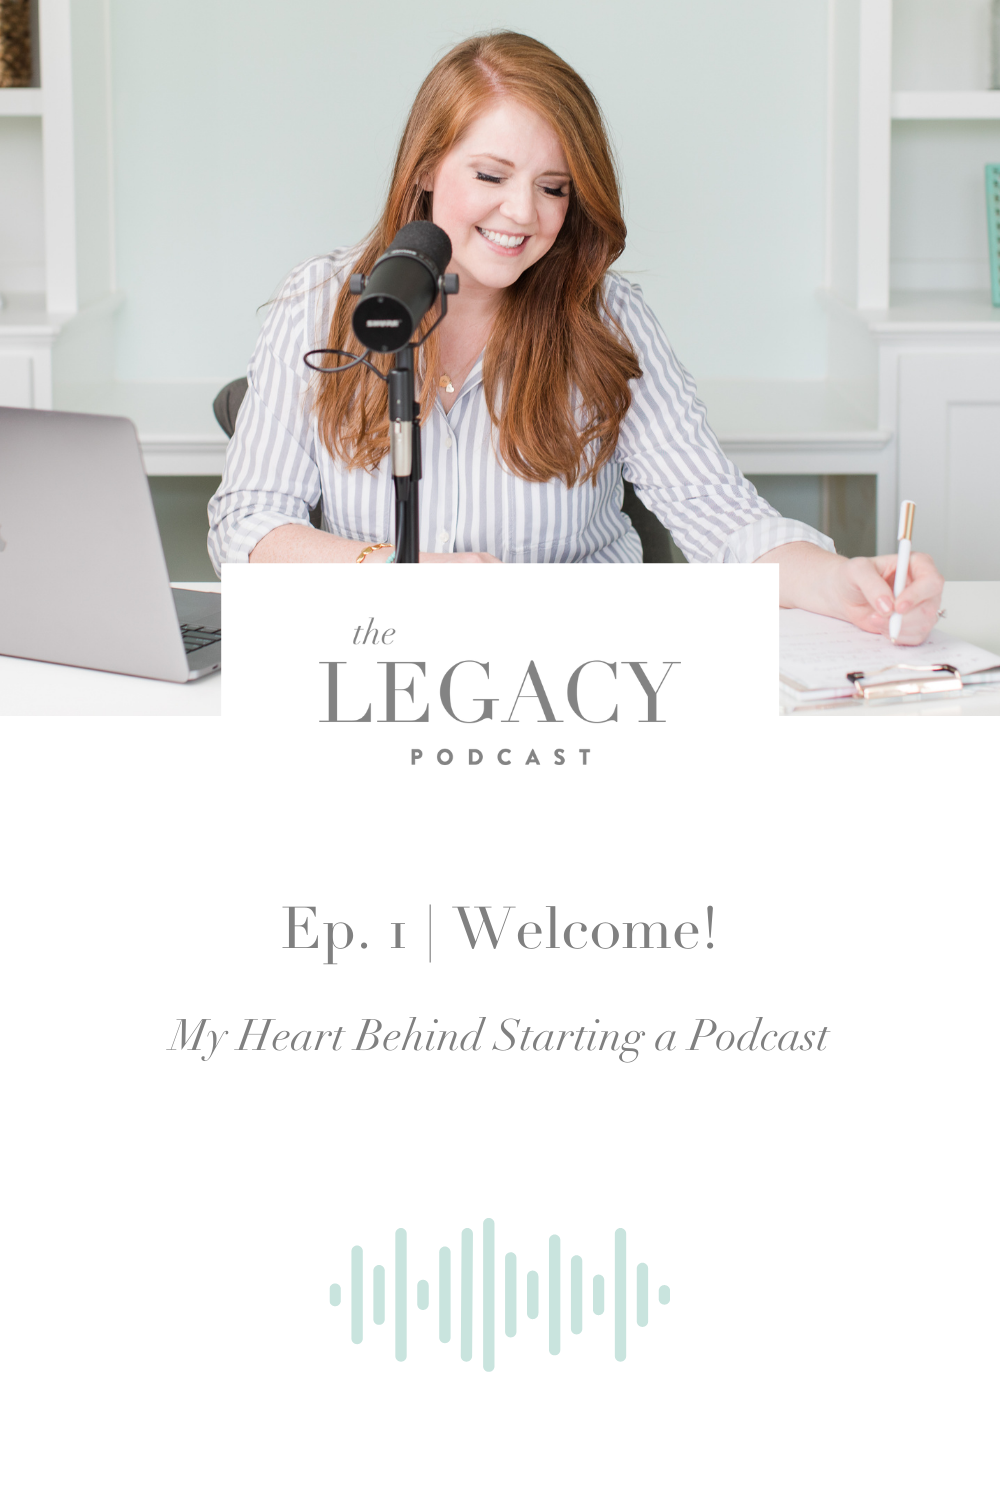 Episode 1 - Welcome! My Heart Behind Starting a Podcast